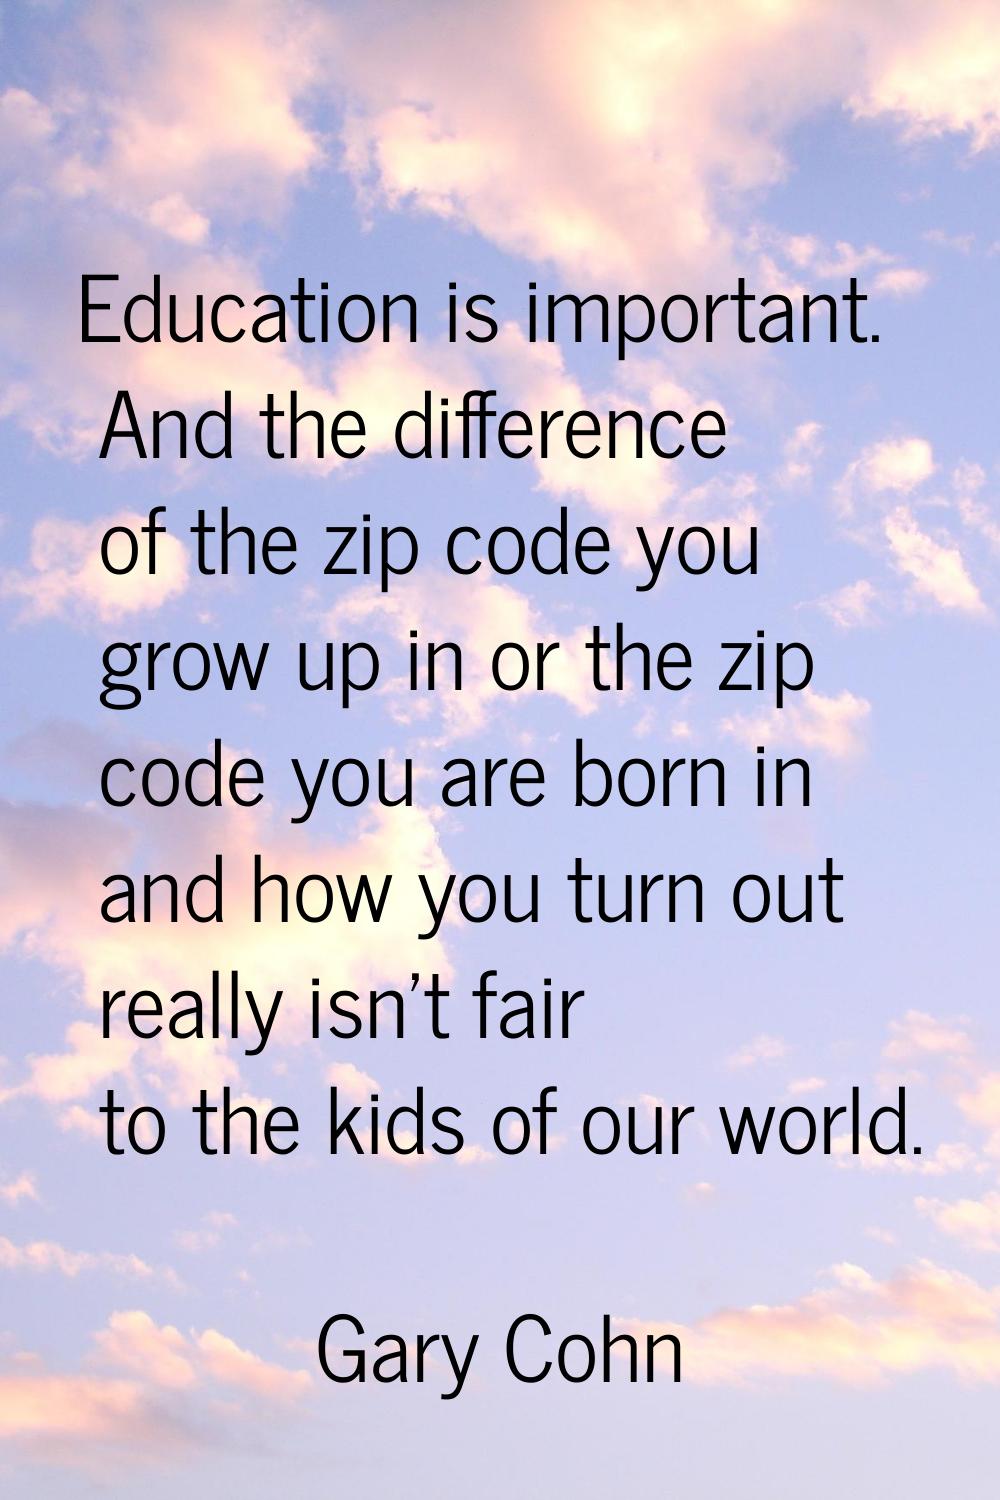 Education is important. And the difference of the zip code you grow up in or the zip code you are b